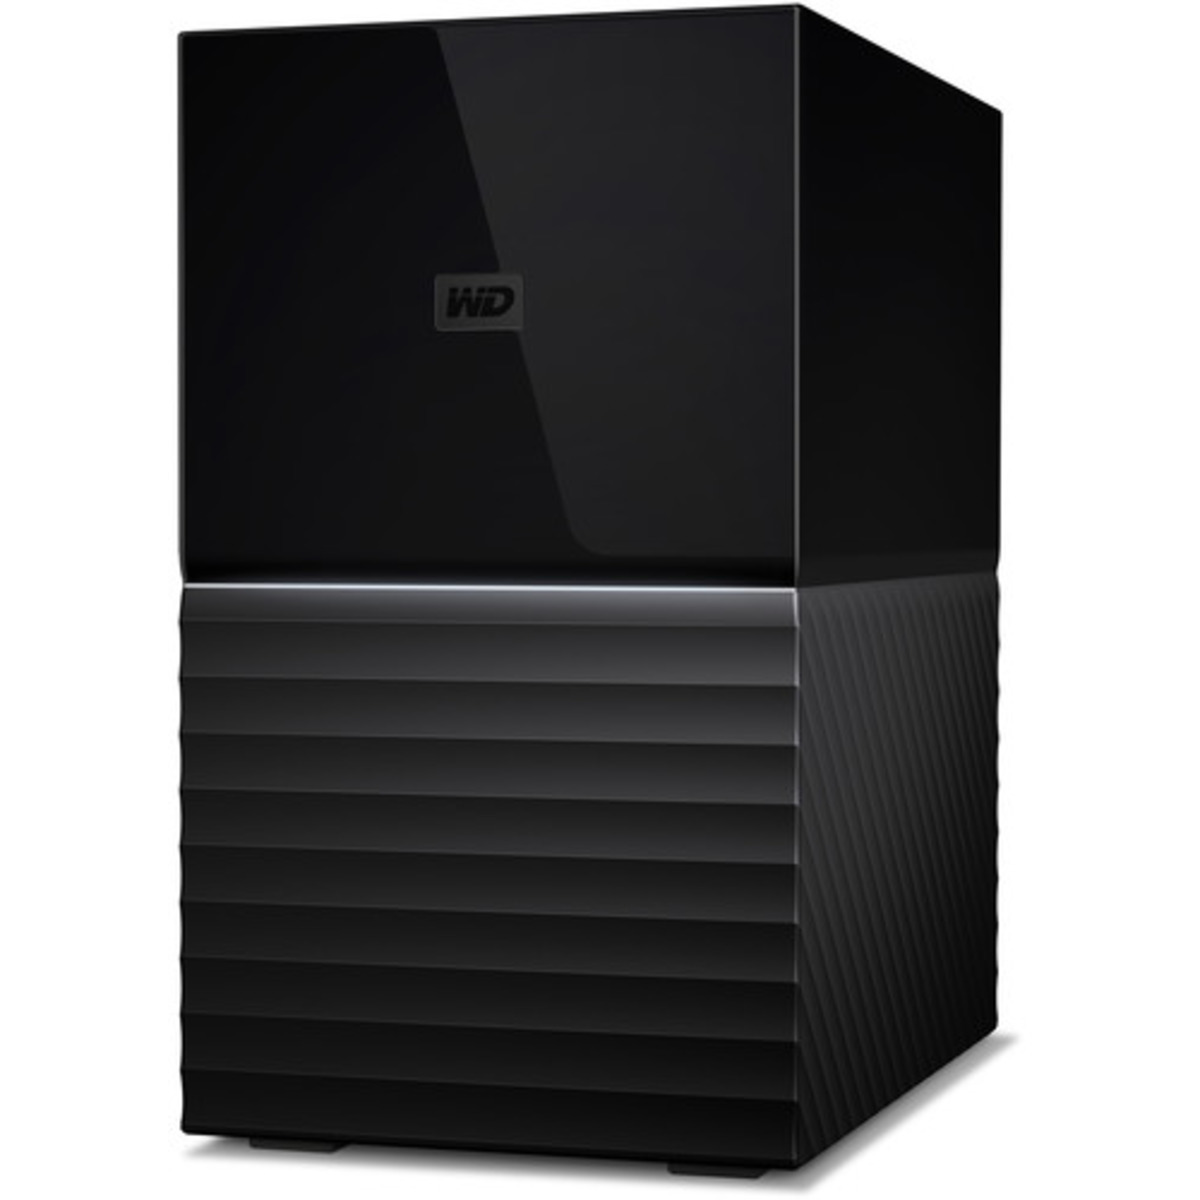 Western Digital My Book DUO Gen 2 2tb 2-Bay Desktop Personal / Basic Home / Small Office DAS - Direct Attached Storage Device 1x2tb Sandisk Ultra 3D SDSSDH3-2T00 2.5 560/520MB/s SATA 6Gb/s SSD CONSUMER Class Drives Installed - Burn-In Tested - ON SALE My Book DUO Gen 2